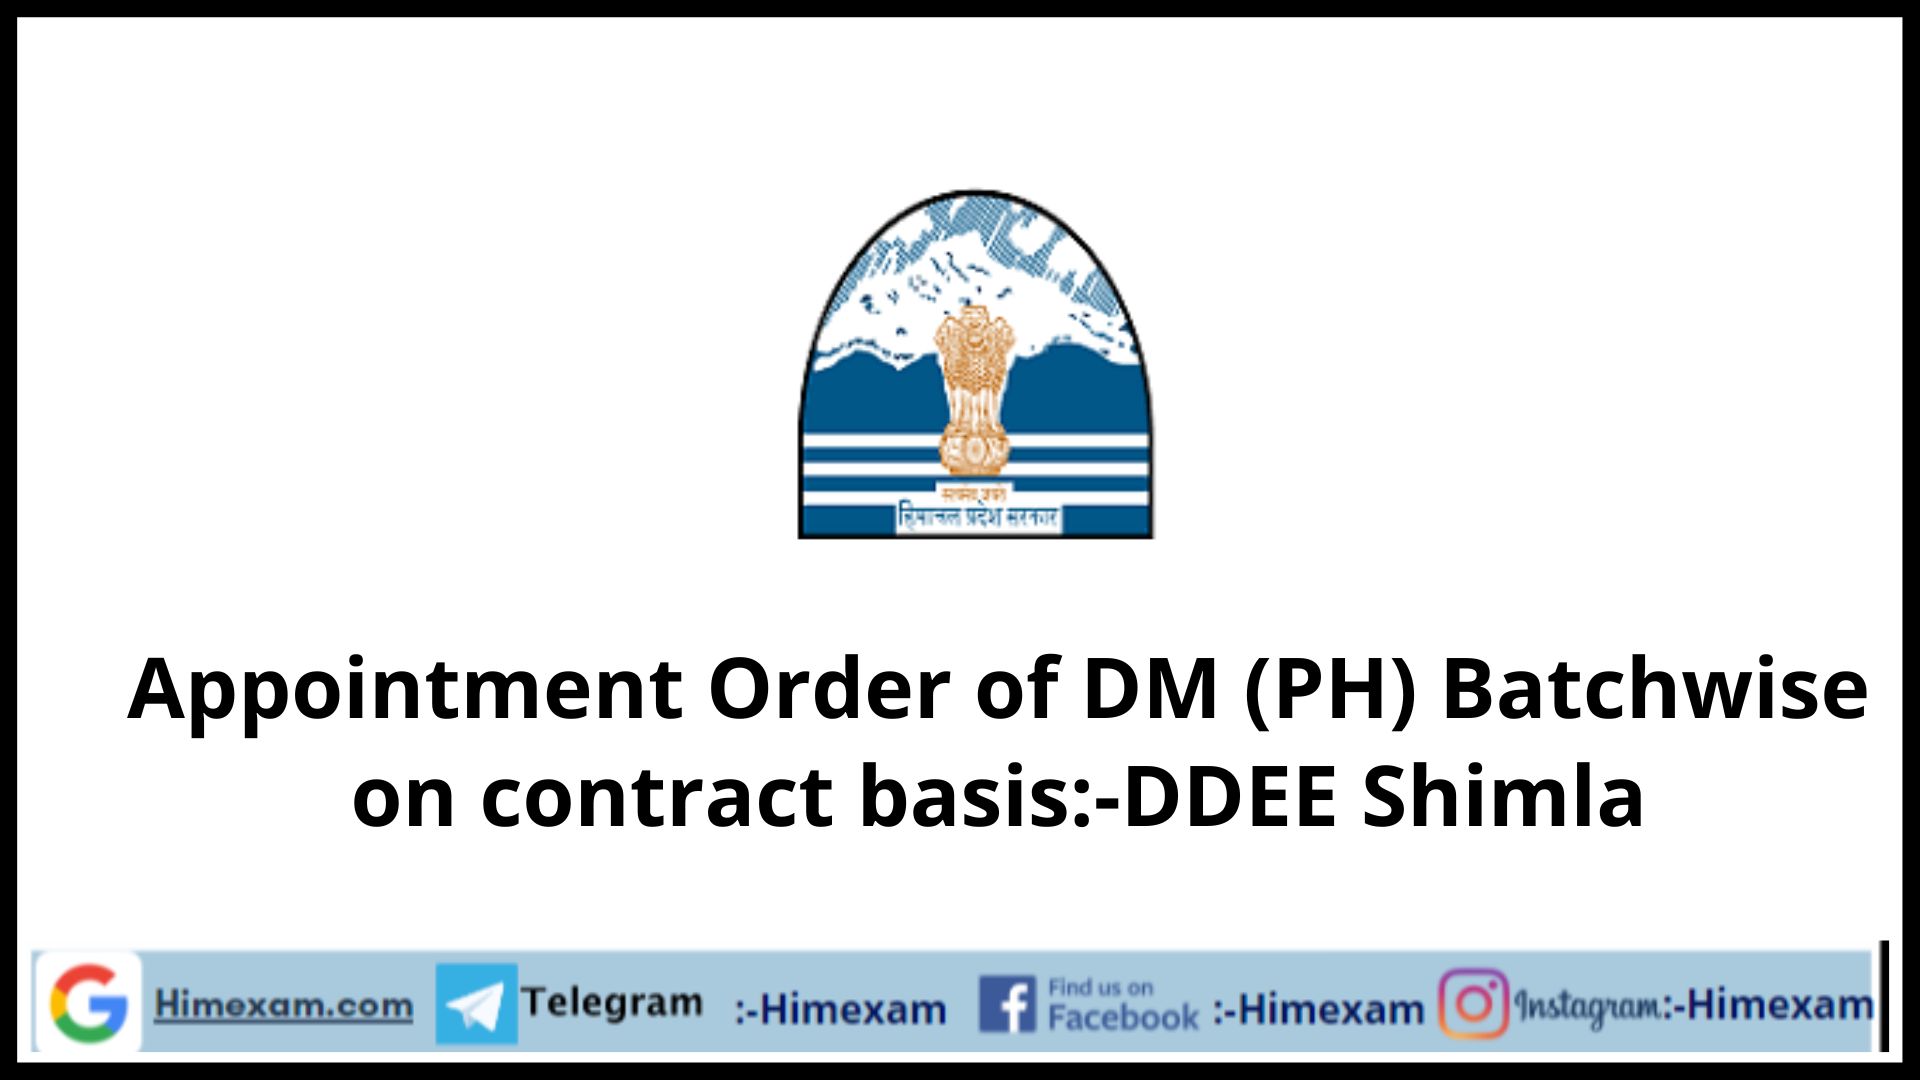 Appointment Order of DM (PH) Batchwise on contract basis:-DDEE Shimla